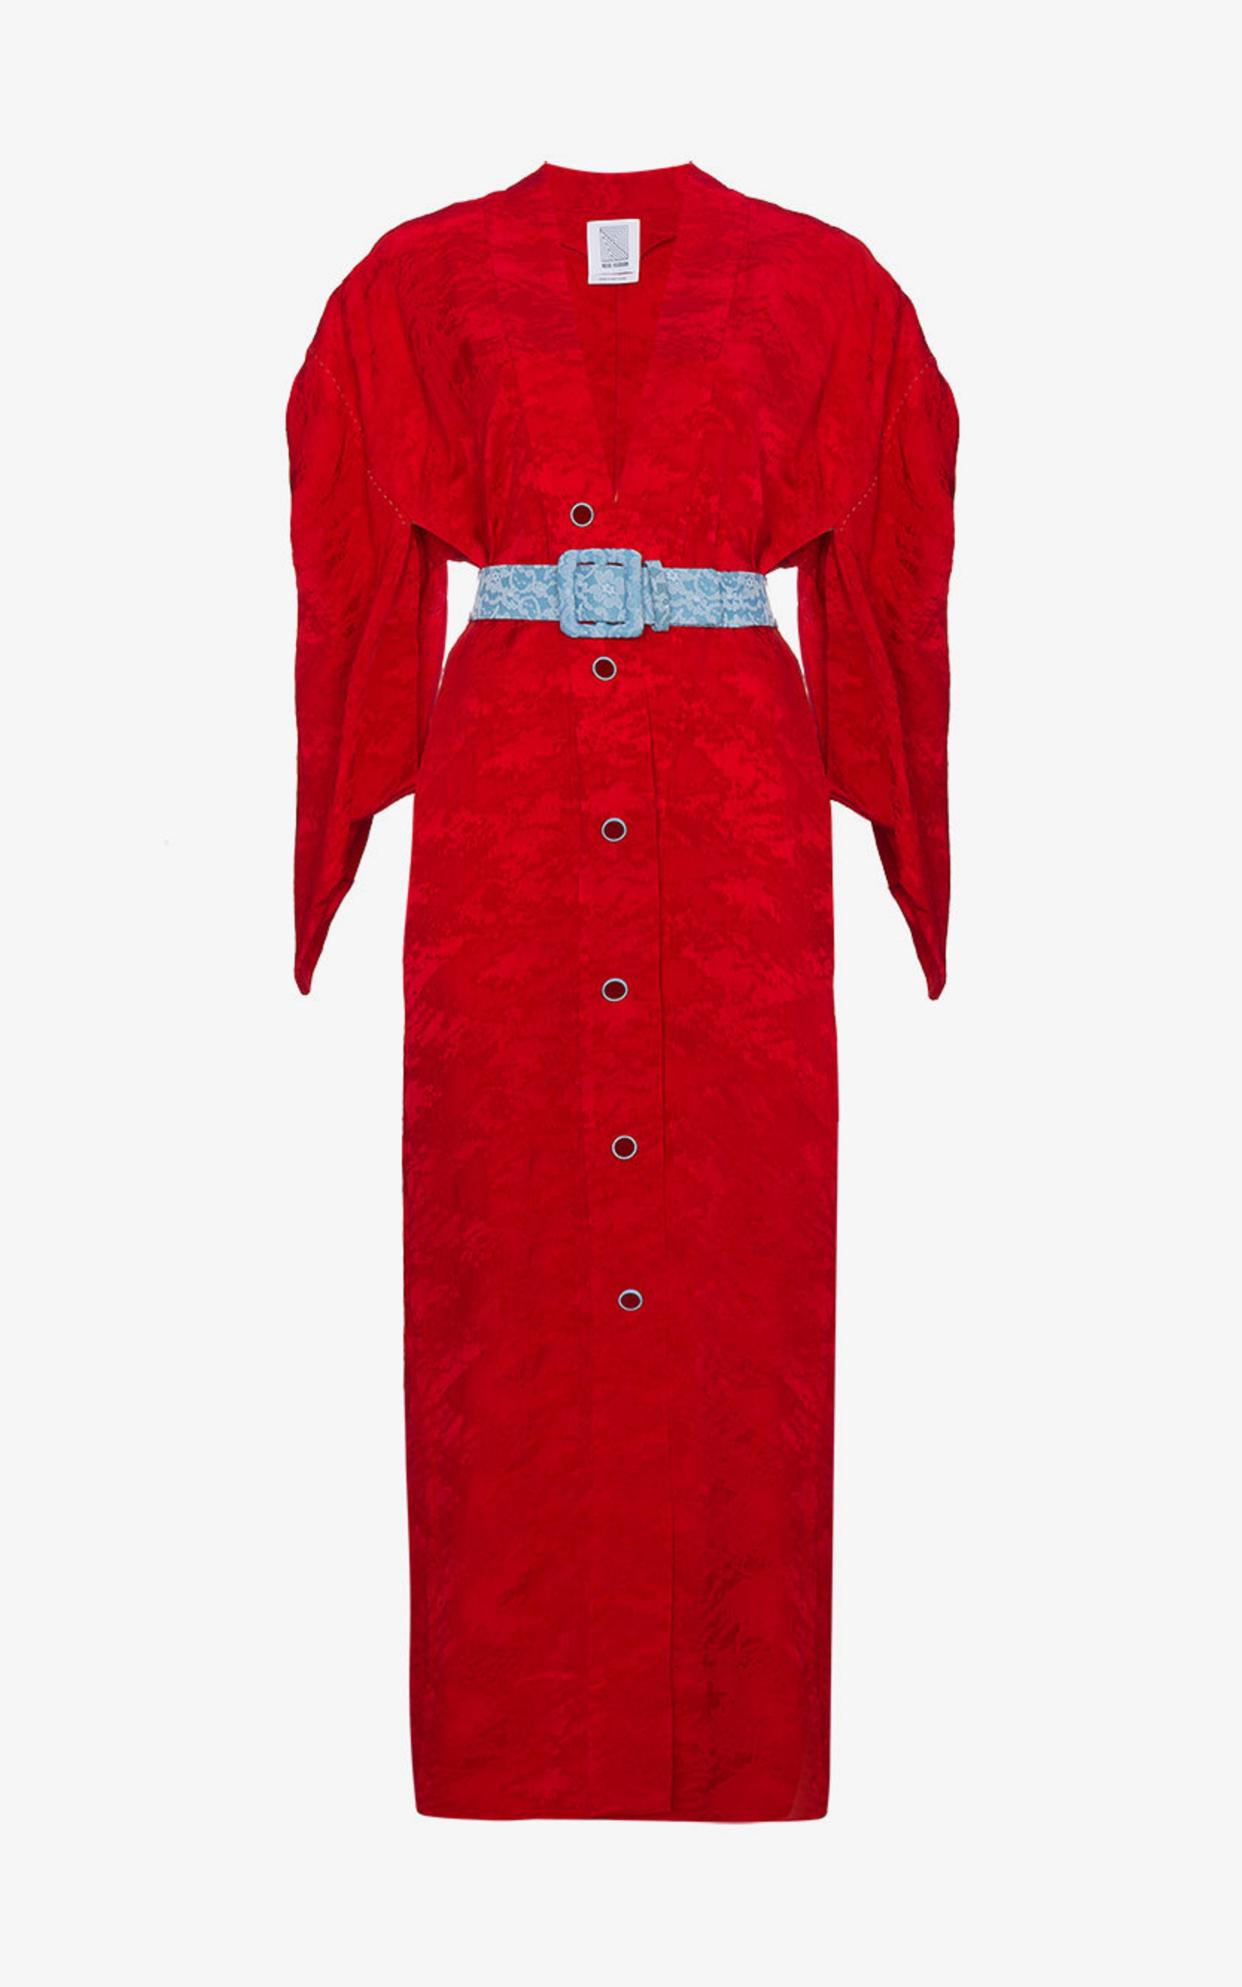  Rosie Assoulin kimono jacquard dress, £2,130, available to rent for £265, Browns